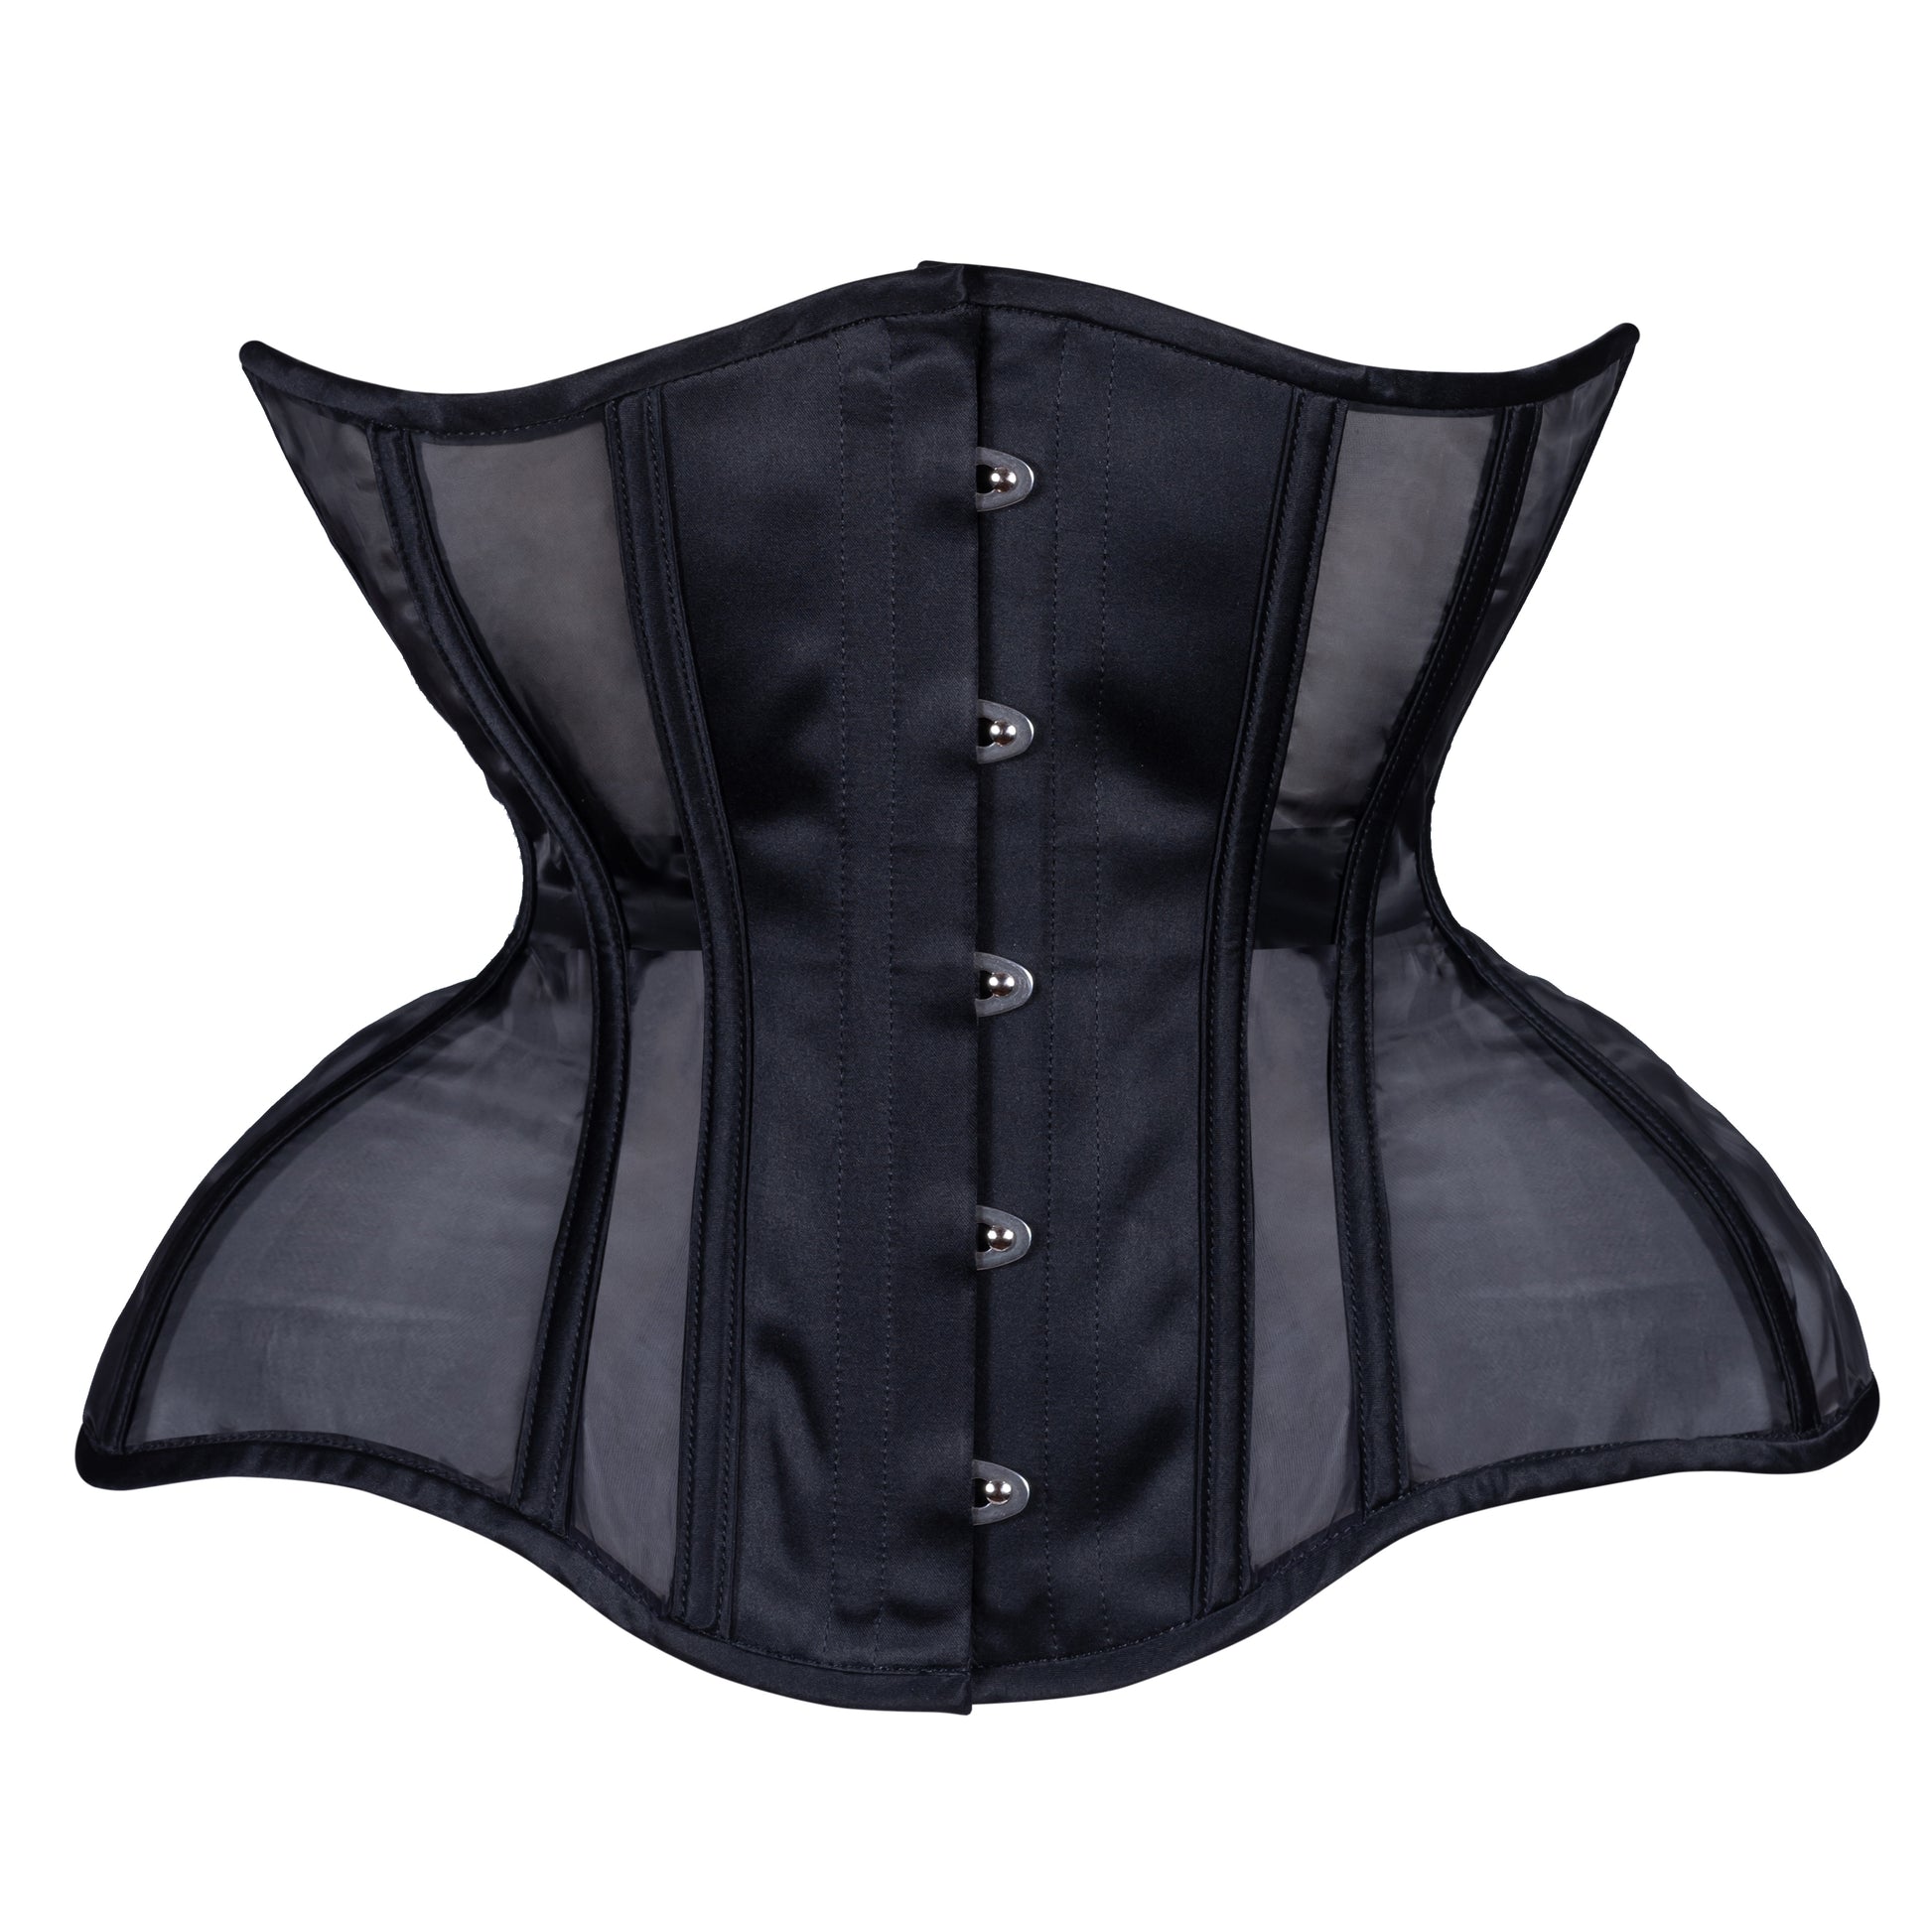 Is this considered stealthing? : r/corsets